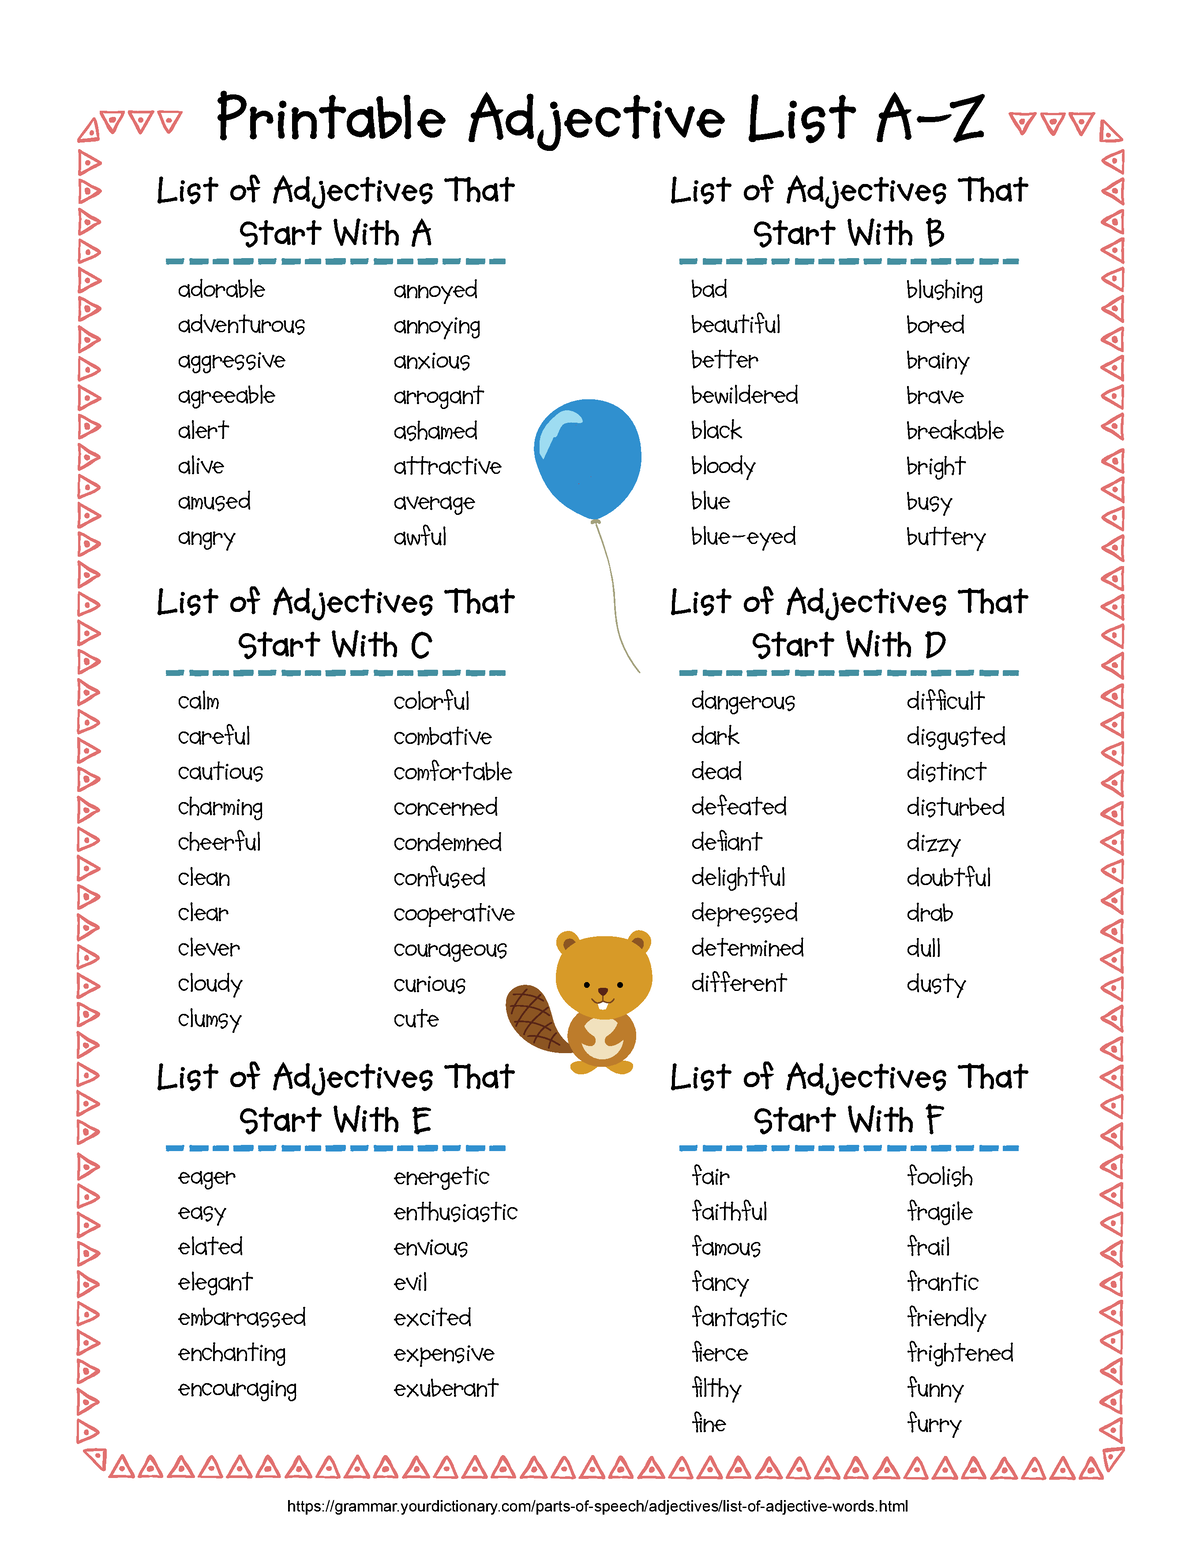 list-228-common-adjectives-printable-adjective-list-a-z-list-of-adjectives-that-start-with-a